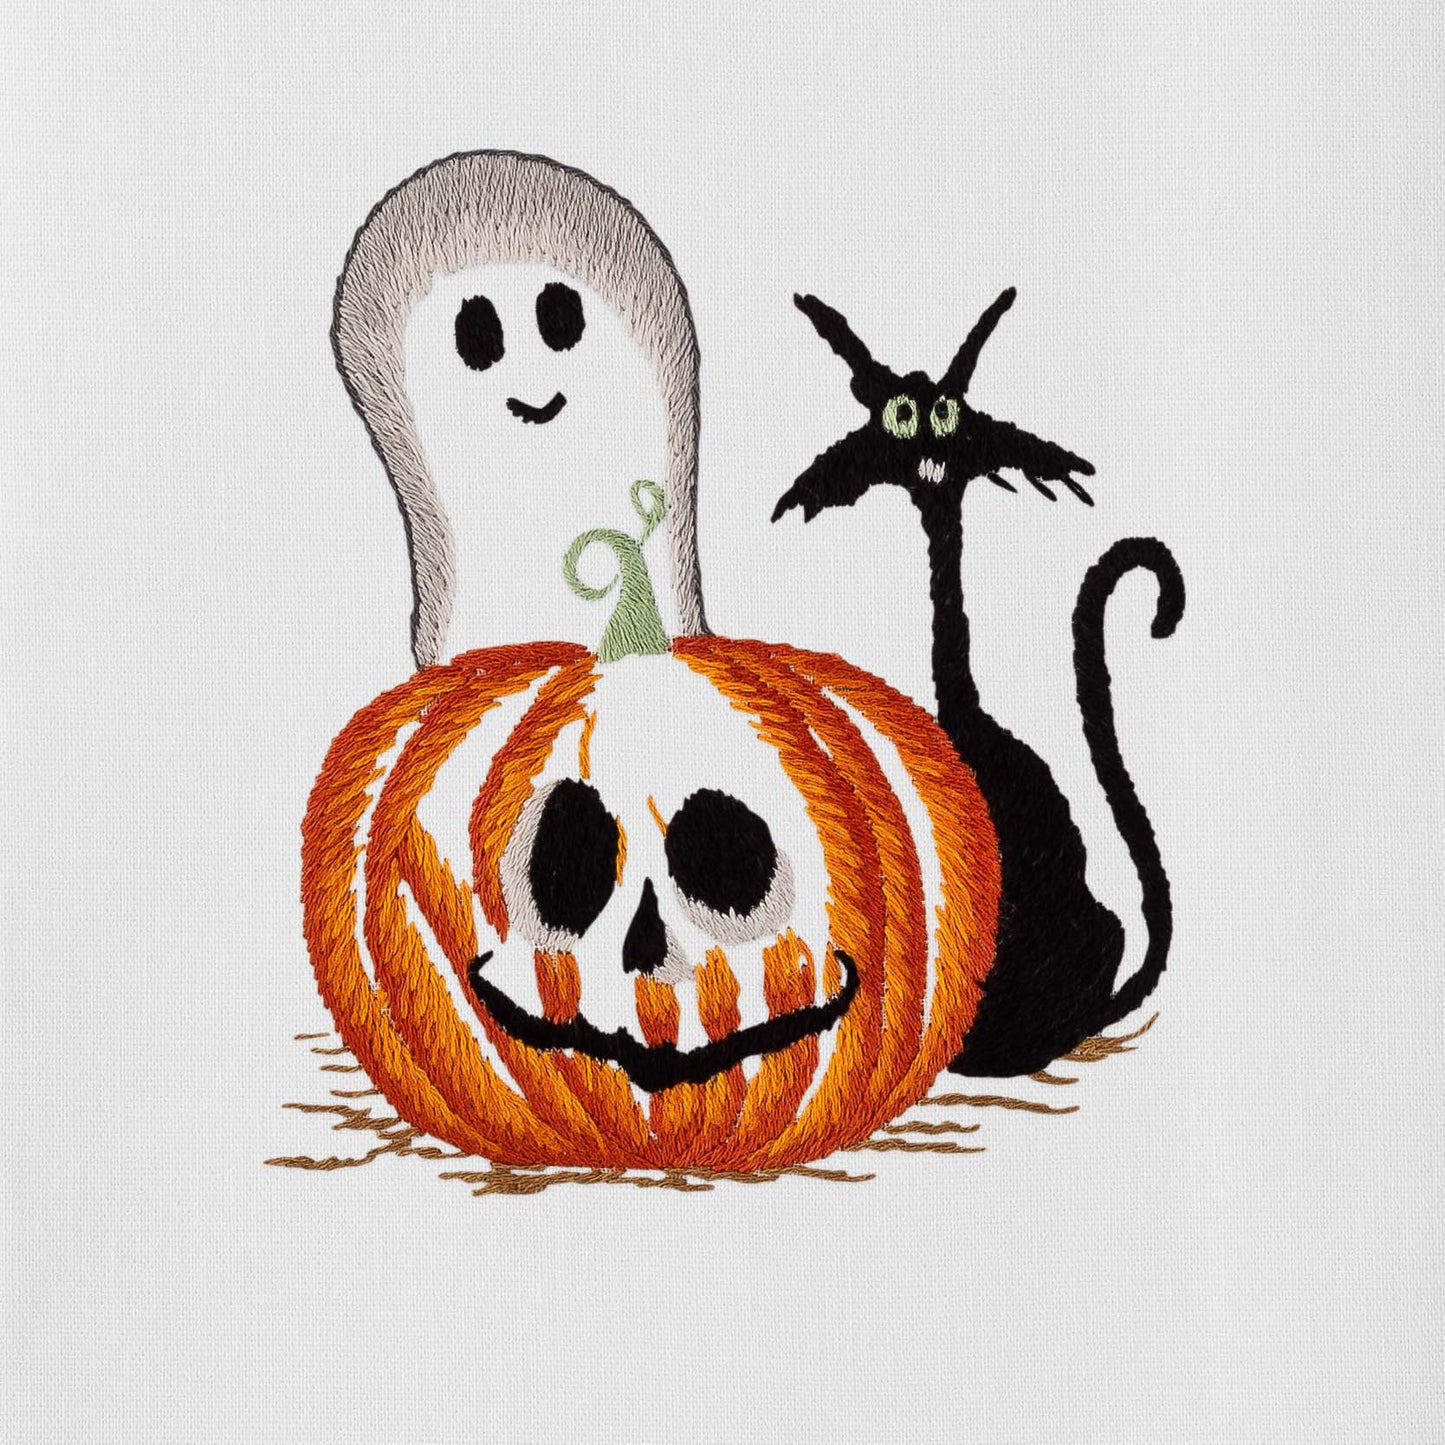 A black cat and a ghost are embroidered on the Henry Handwork Halloween Friends Hand Towel.